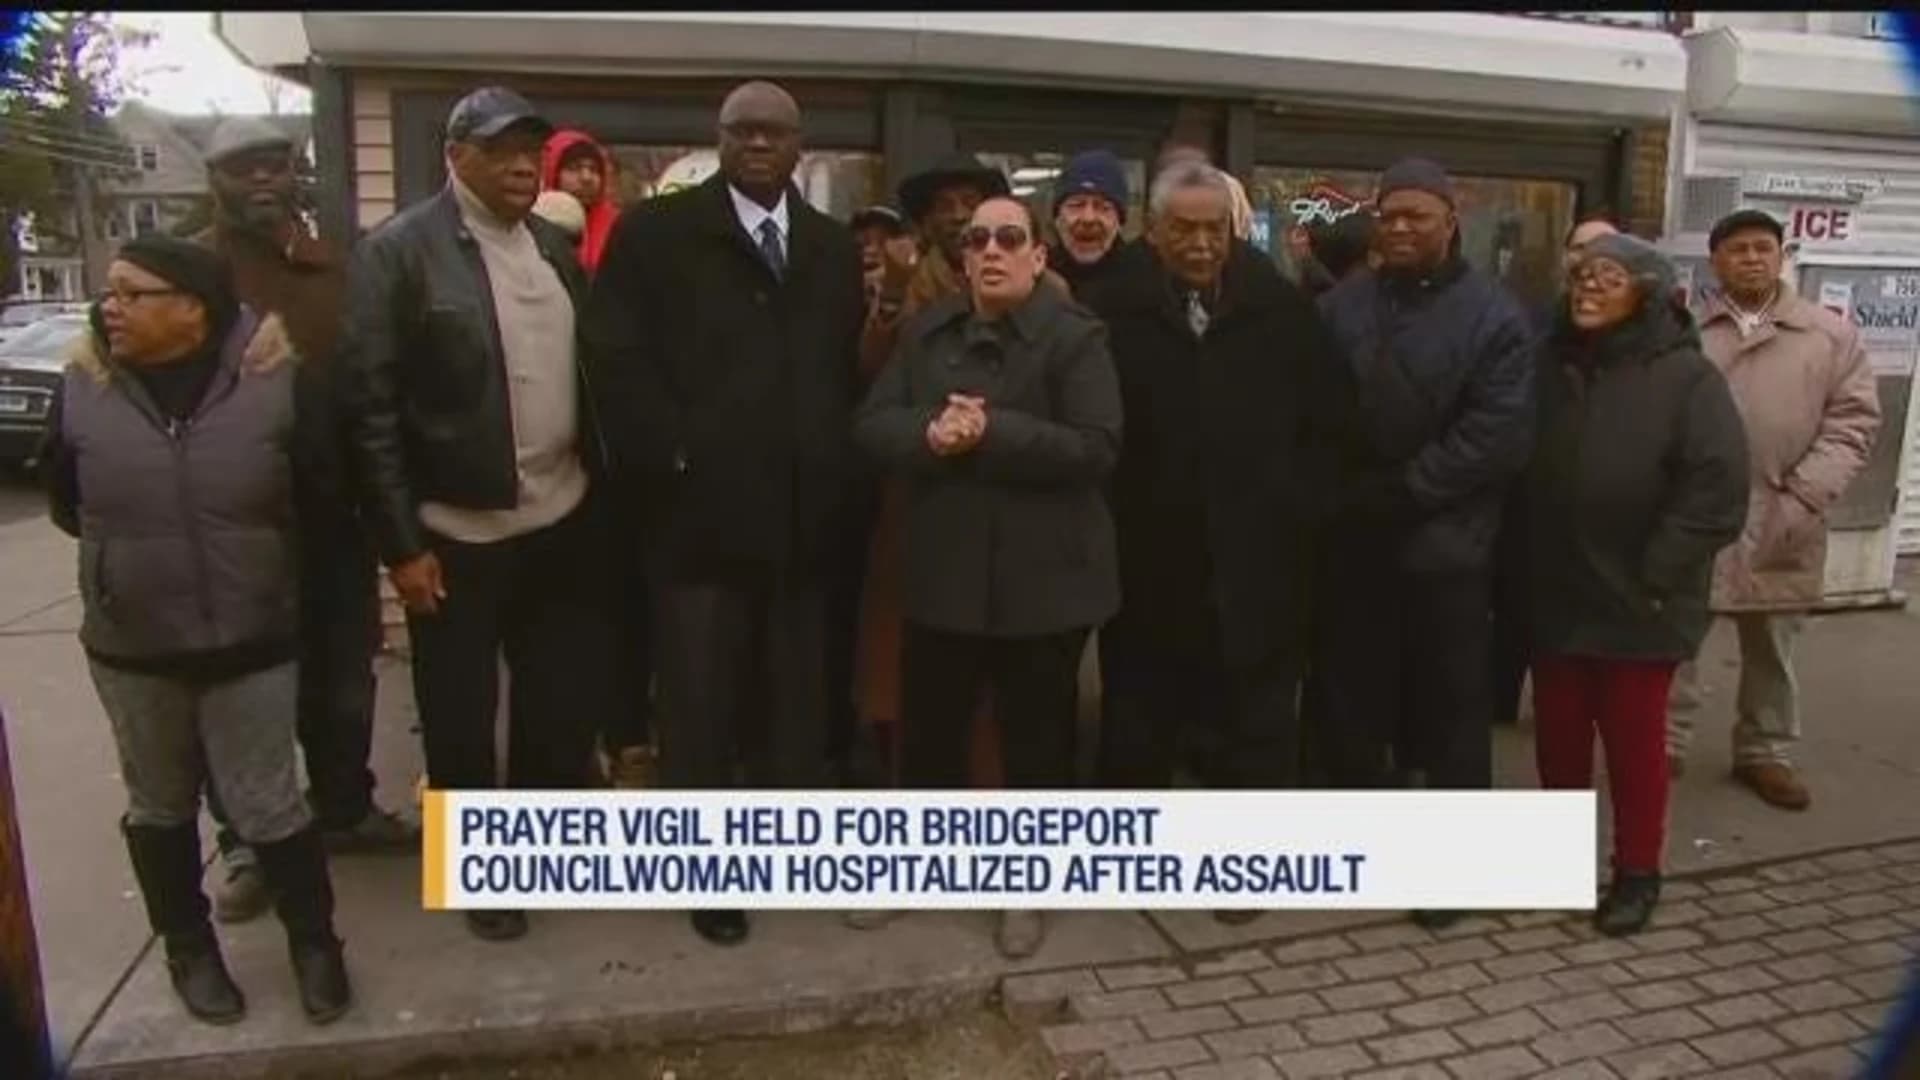 Prayer vigil held for councilwoman who was assaulted